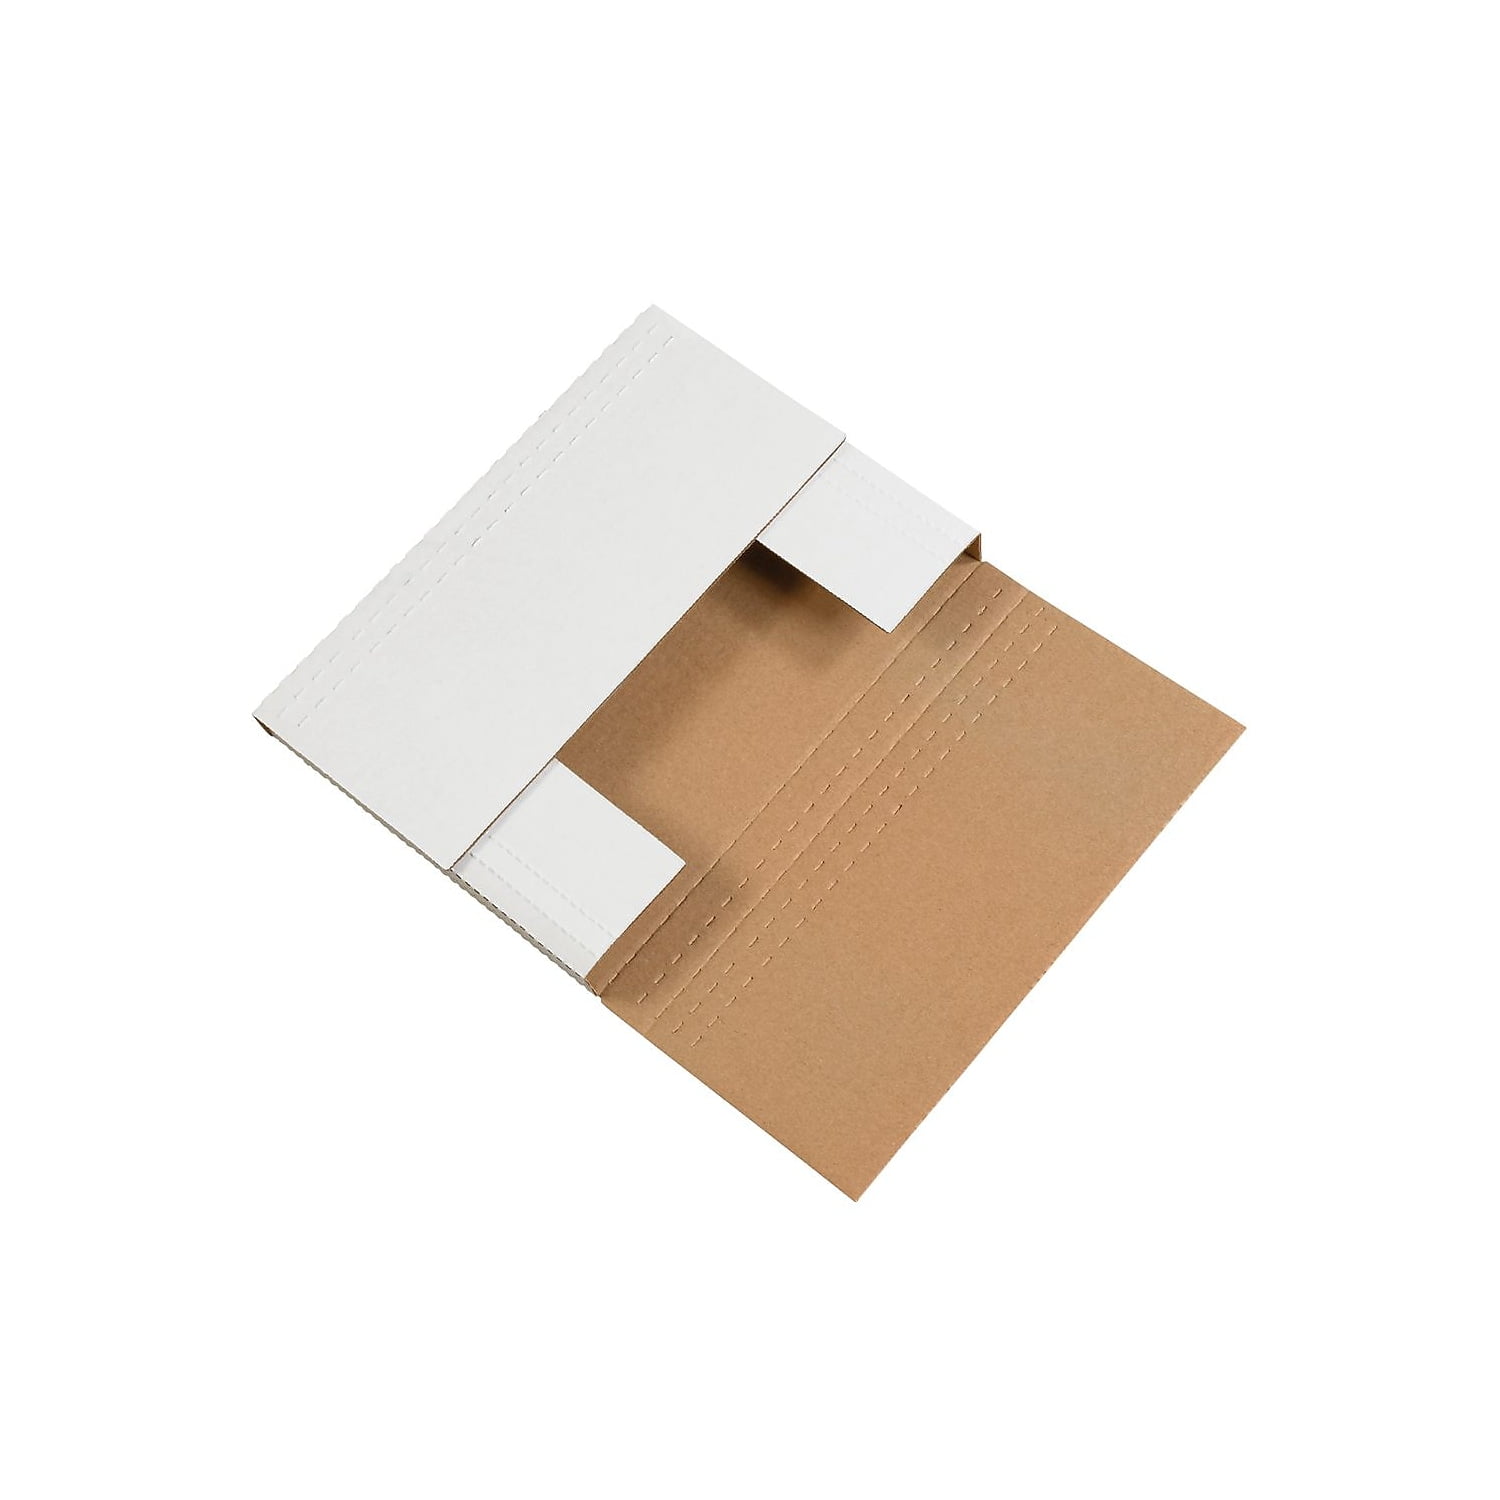 Vinyl Record Mailers 100 Variable Depth 45 RPM Record Mailer Boxes Bookfolds Box 